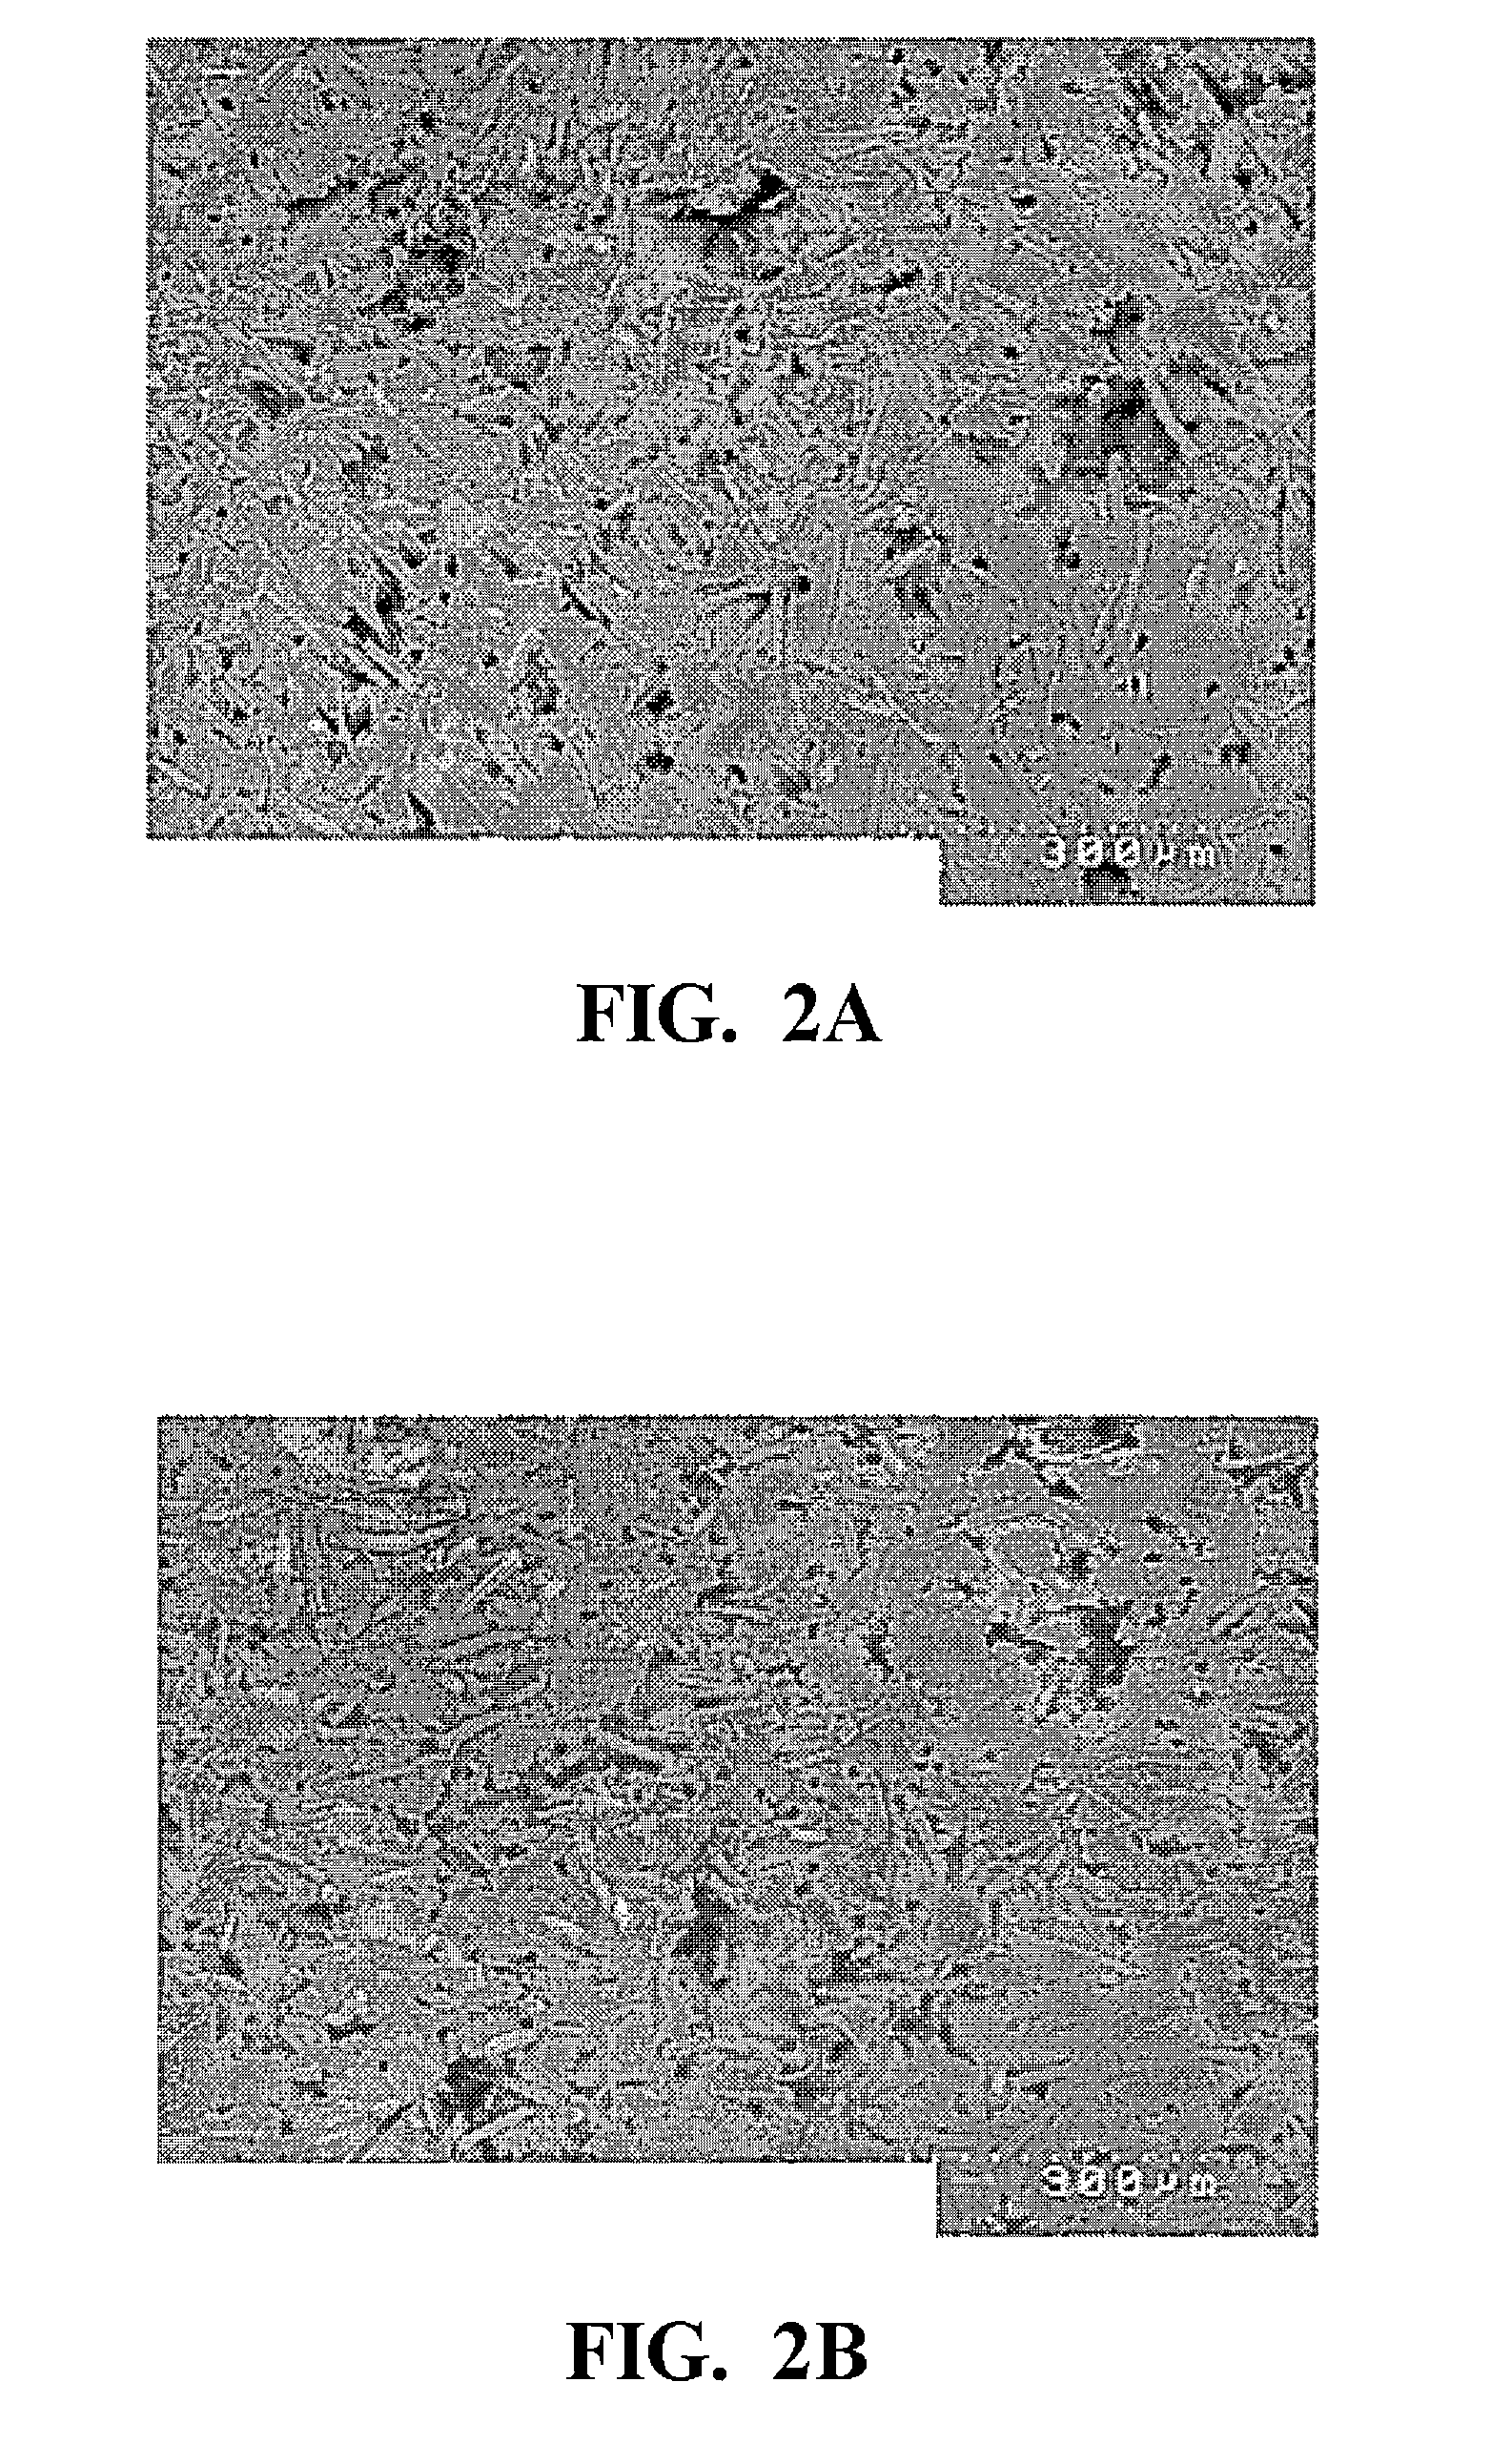 Fluororesin and polyamide fiber composition, and sliding member made therefrom